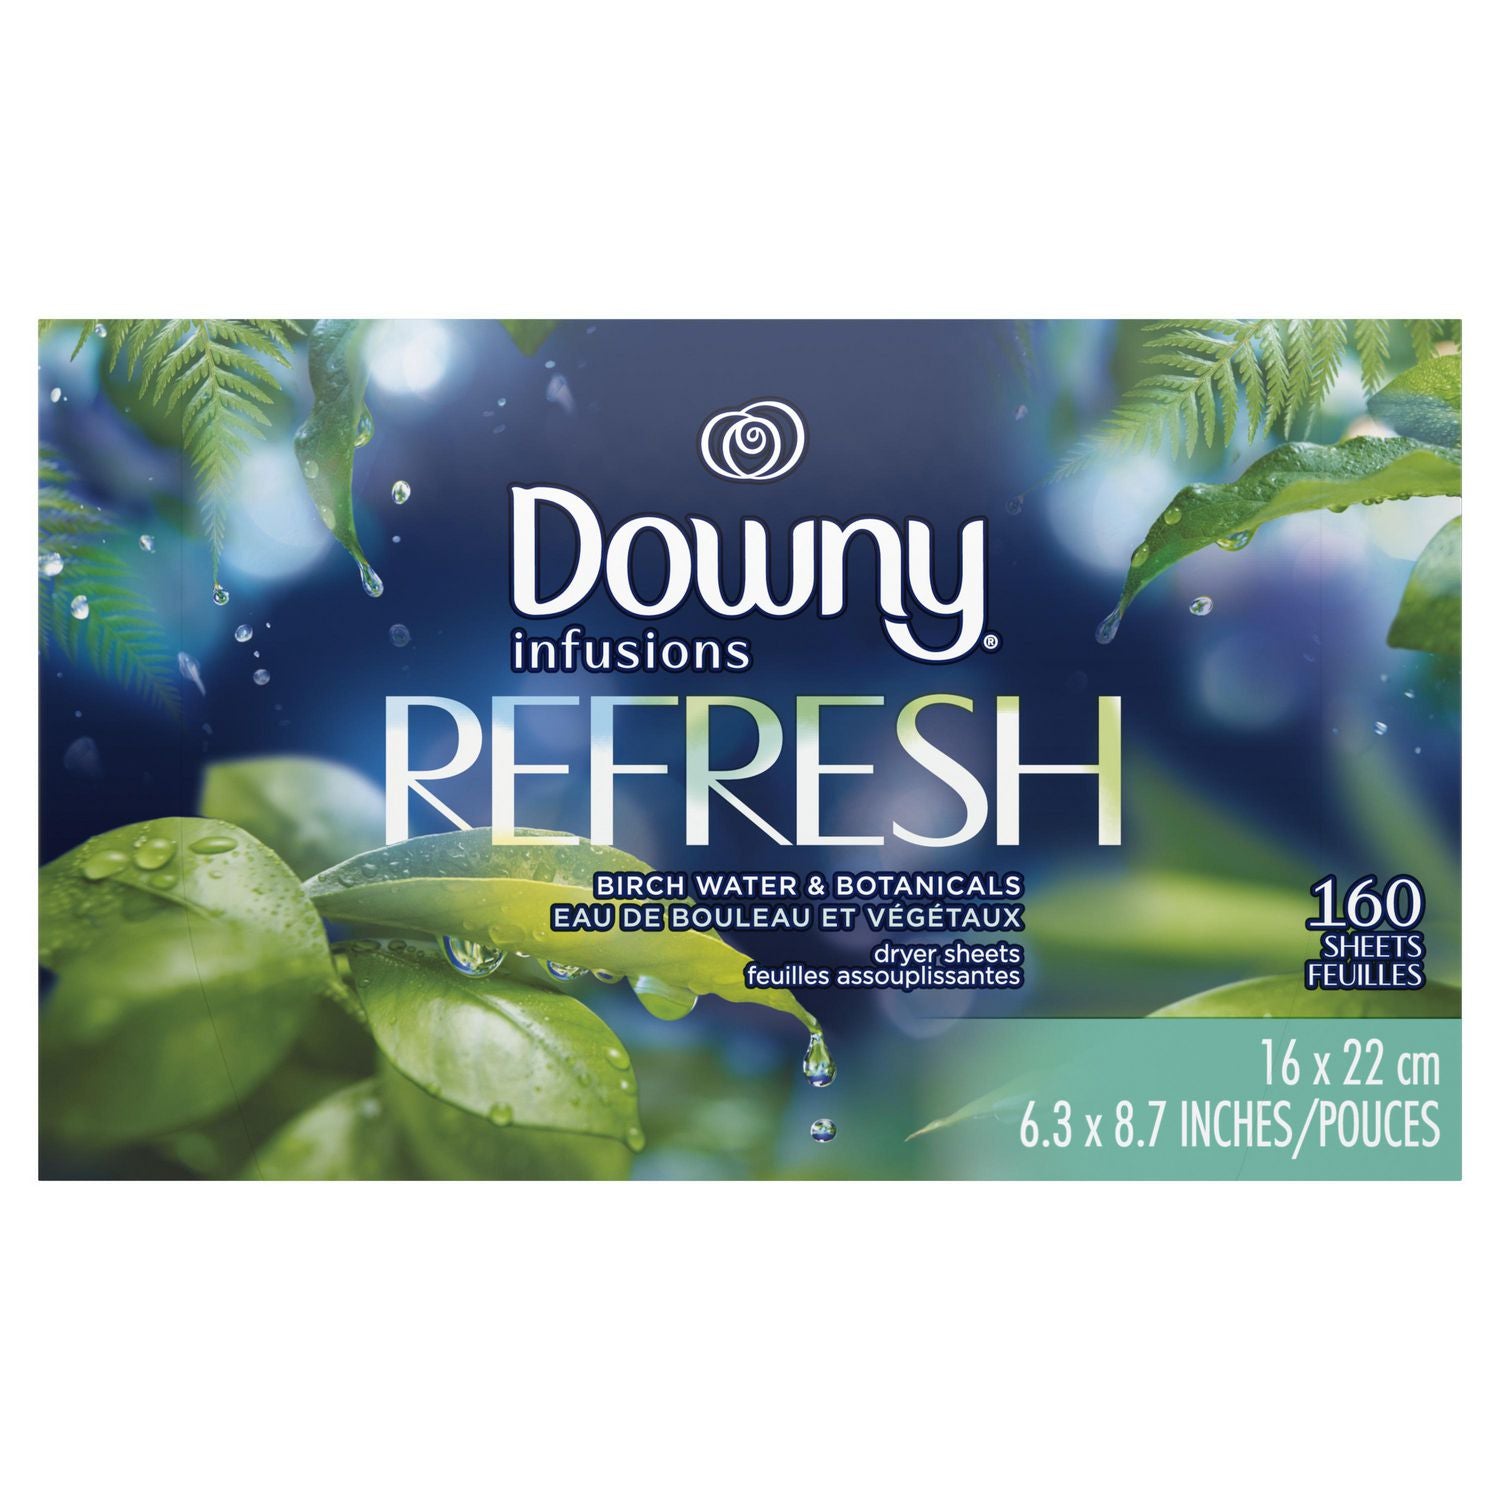 Downy Infusions Fabric Softener Birch Water & Botanicals 160 Dryer Sheets